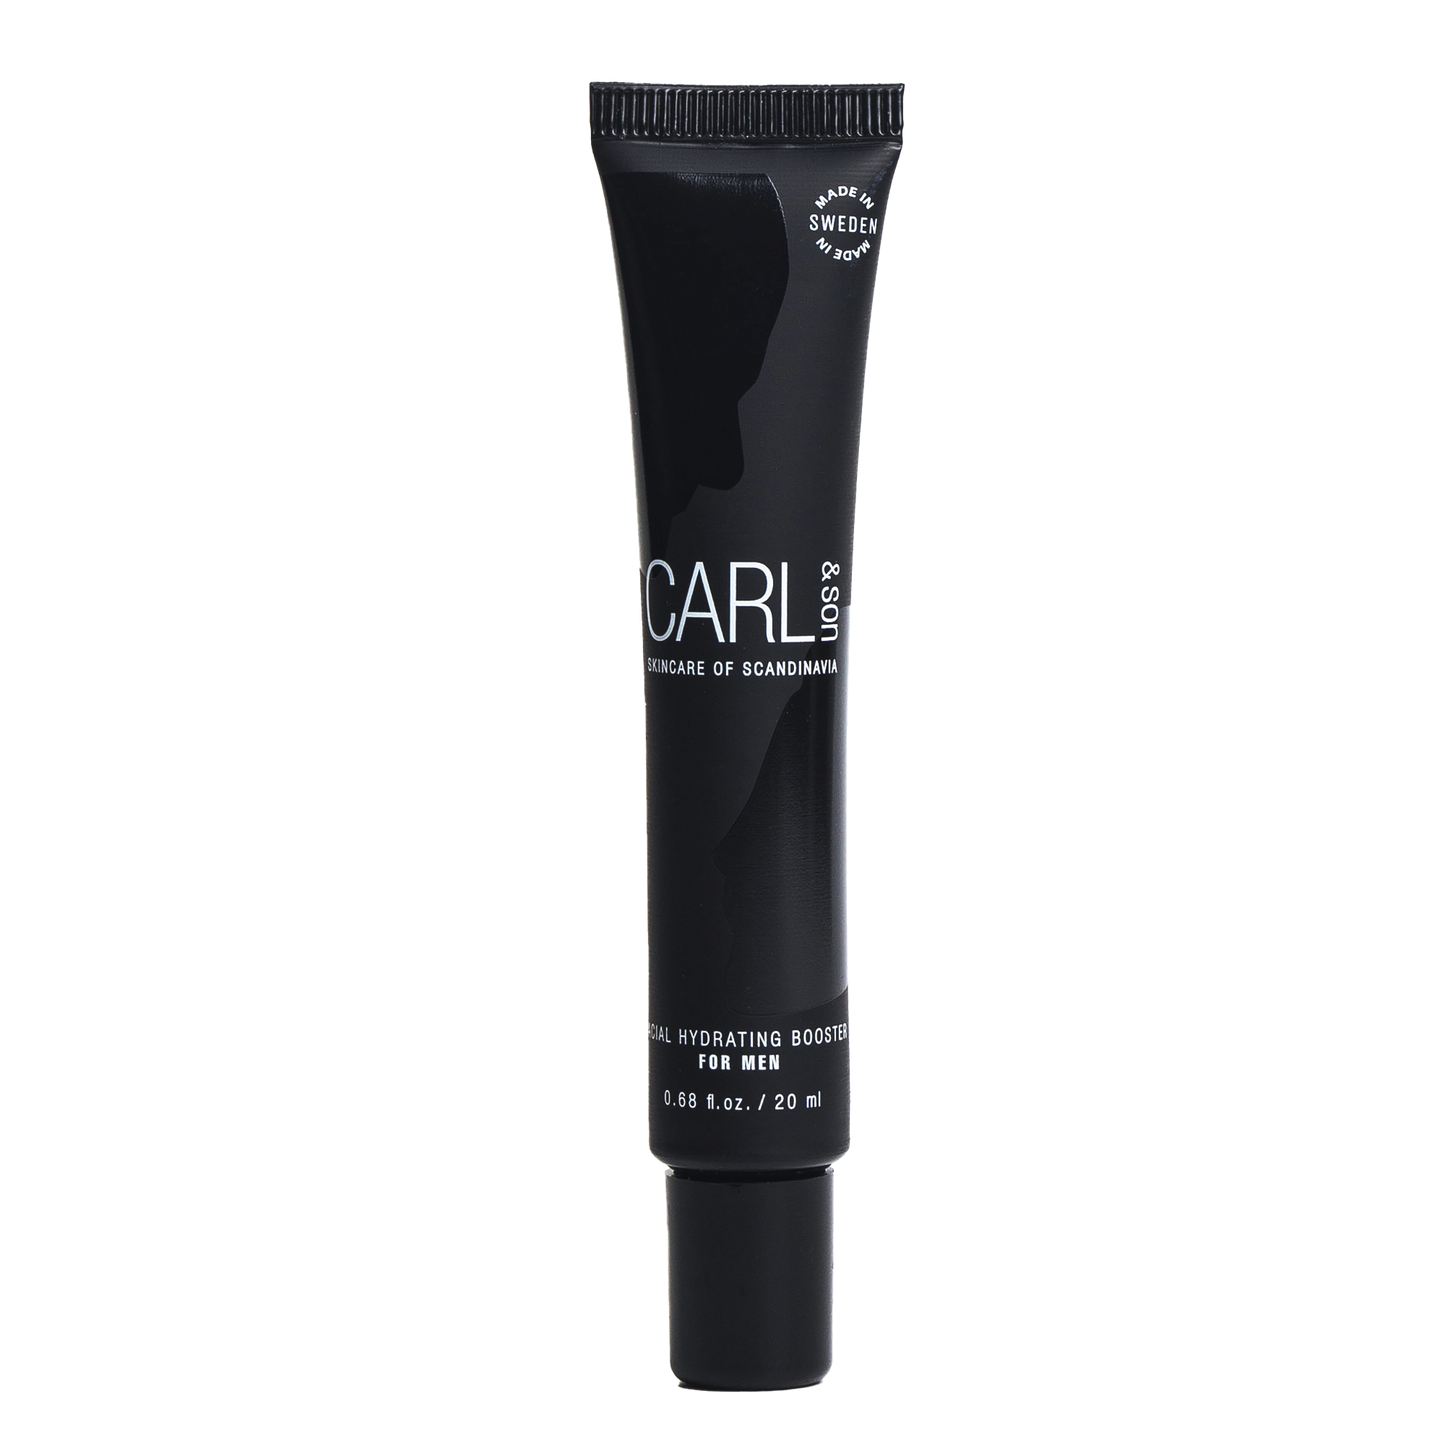 facial hydrating booster in a smaller black tube